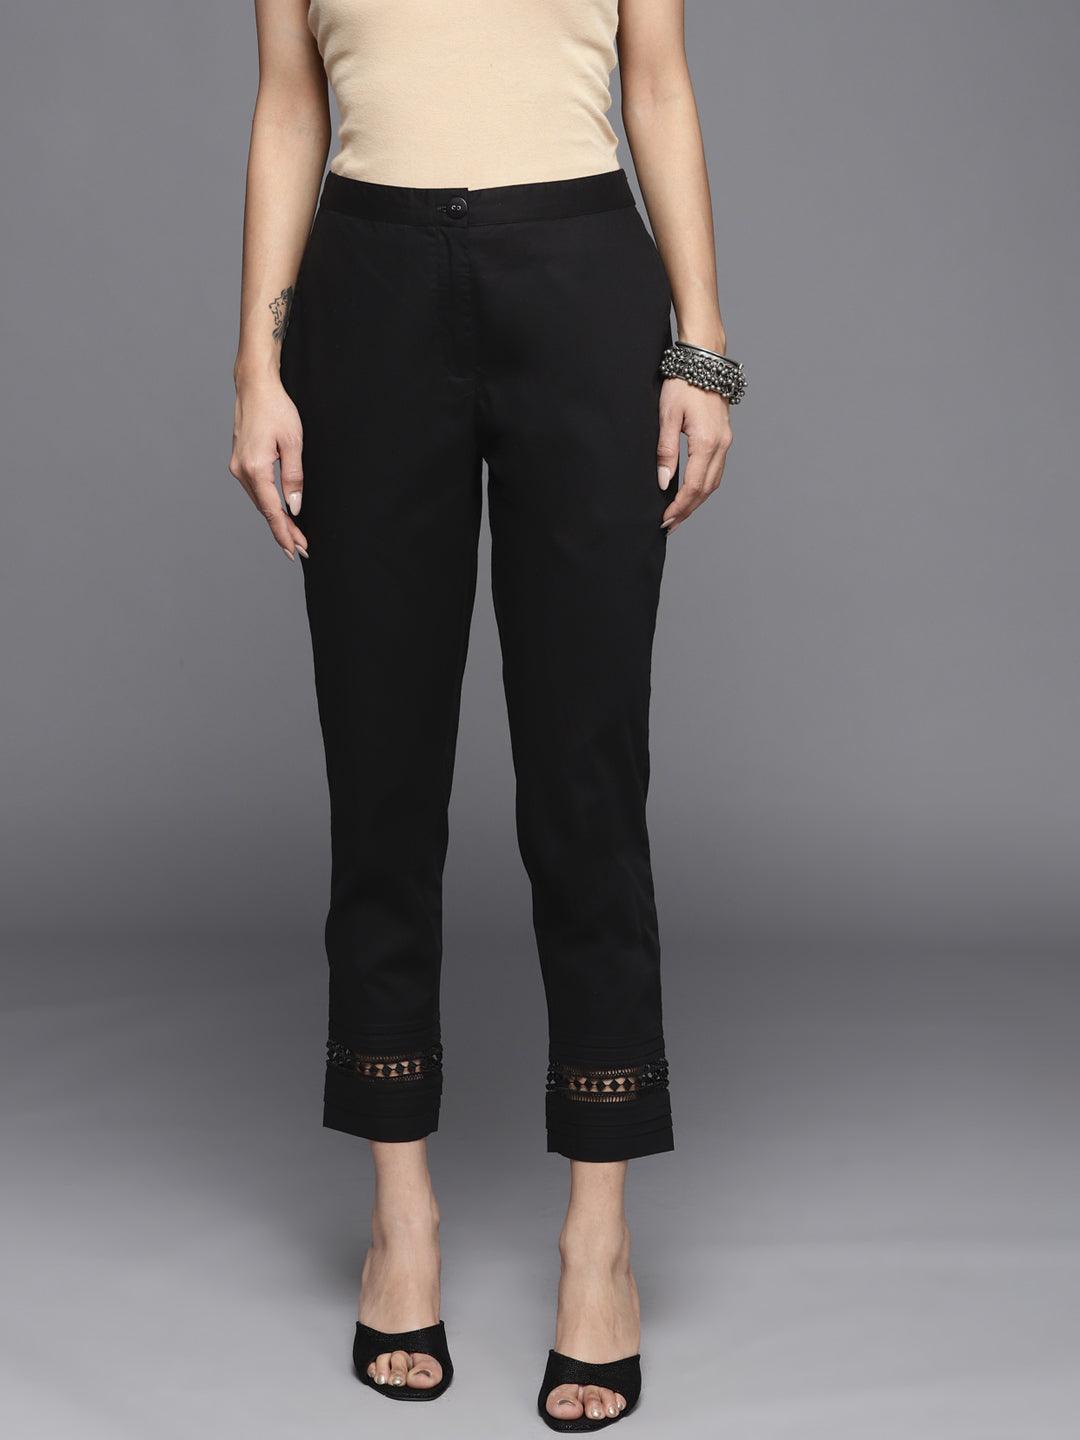 Black Solid Cotton Trousers